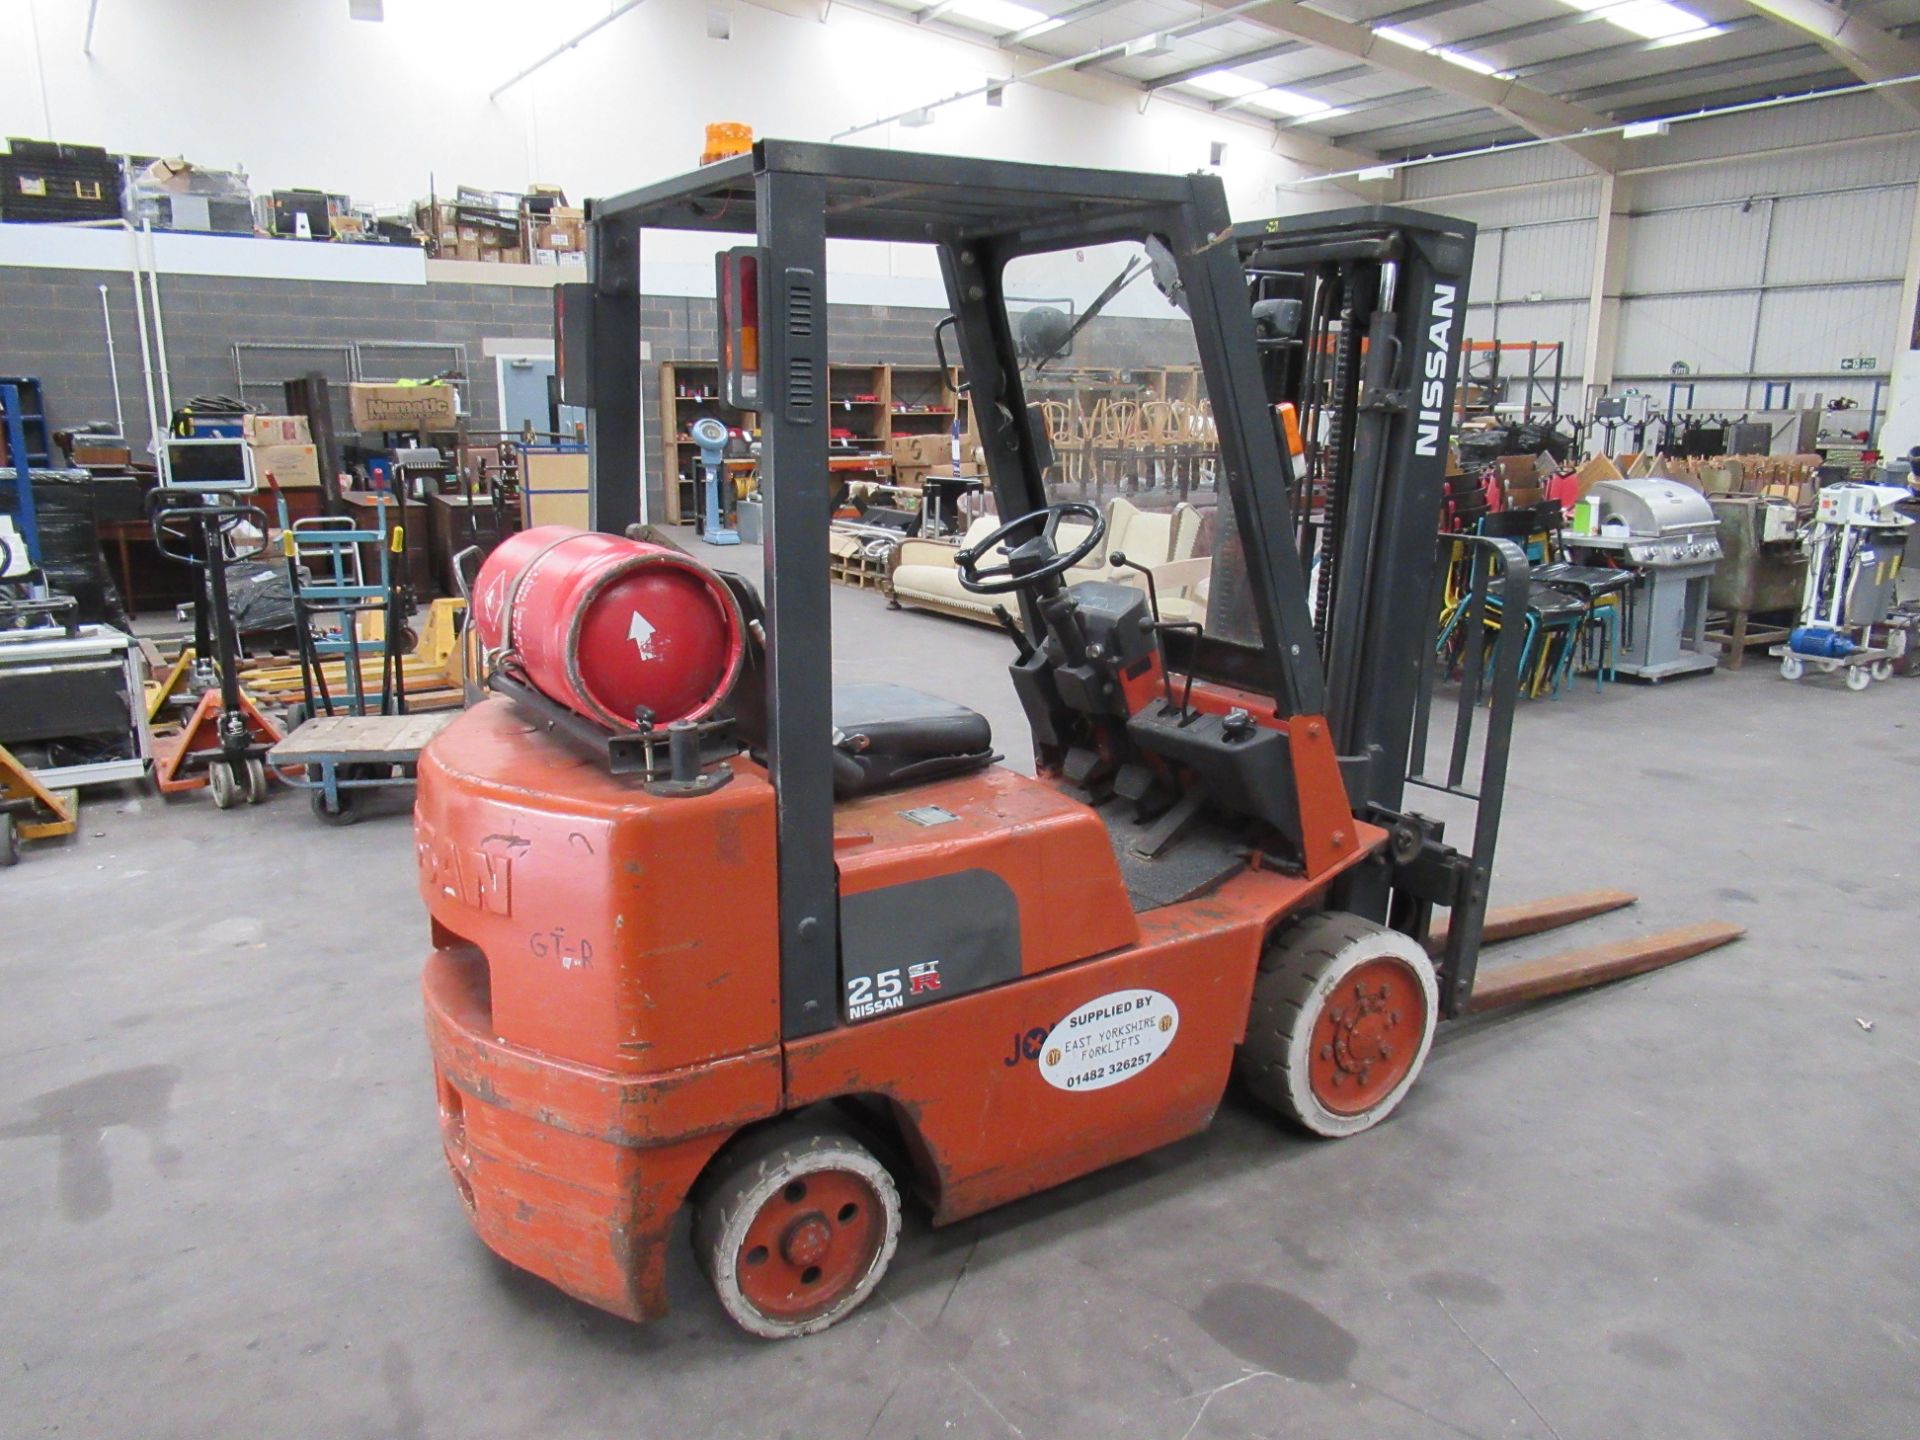 Nissan 25 Gas Powered Forklift Truck with Sideshift Attachment, Max Capacity 2500kg. Drives and Oper - Image 4 of 9